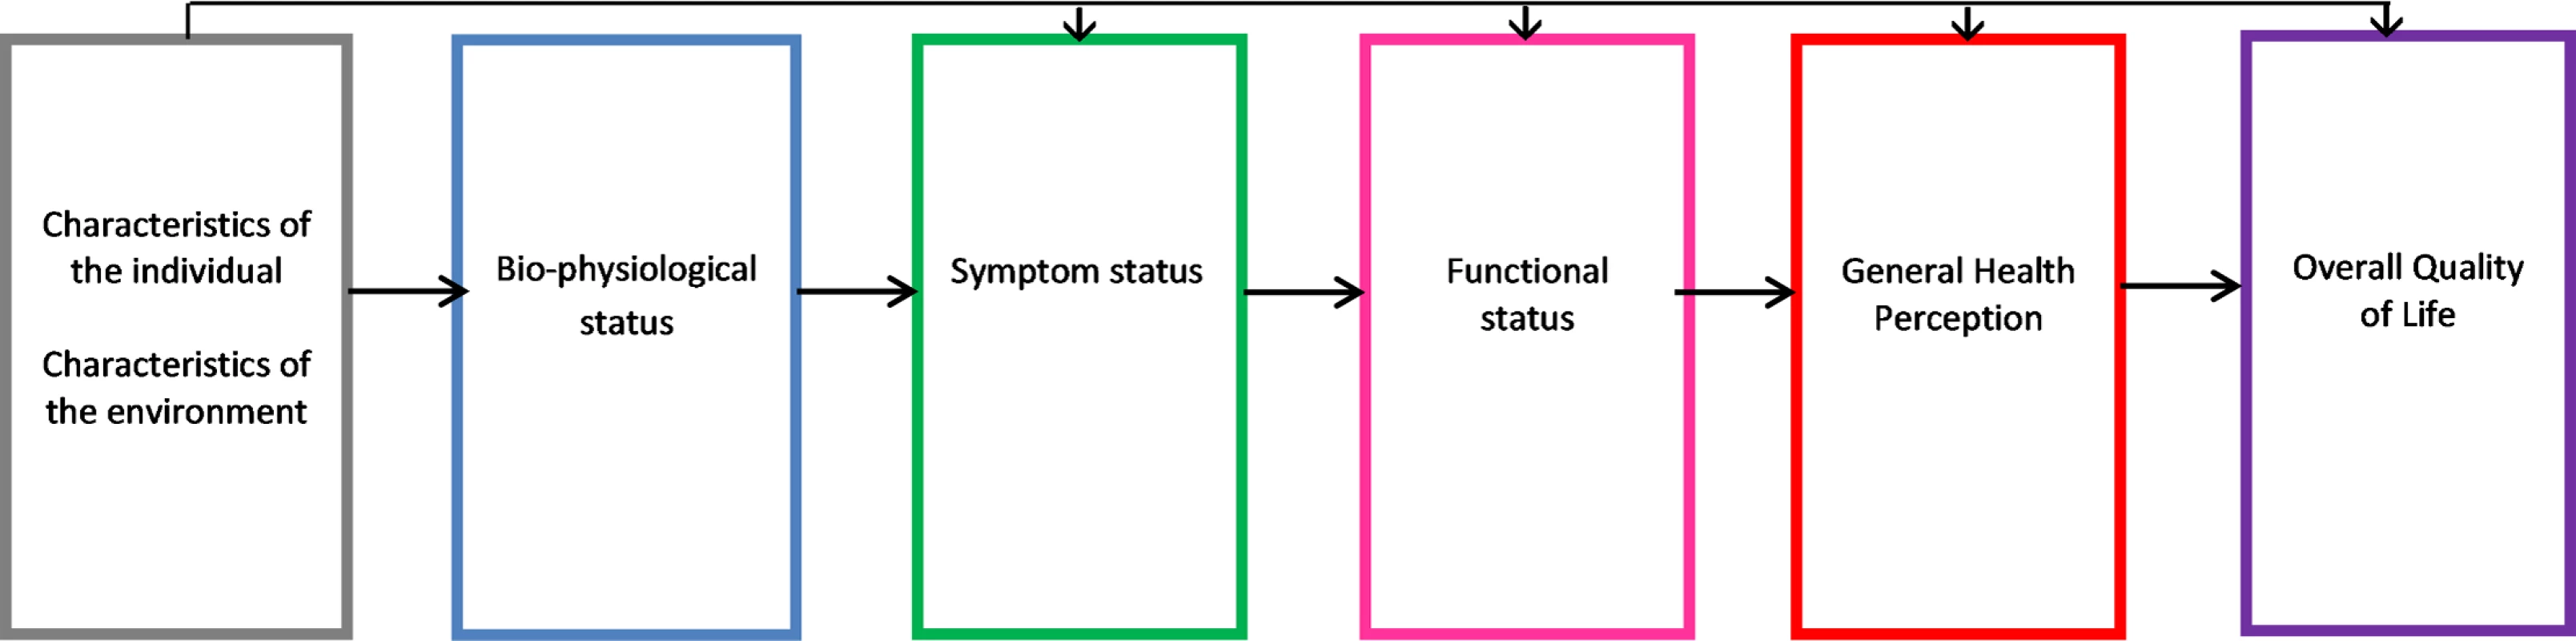 Wilson and Cleary’s health-related quality of life conceptual model.